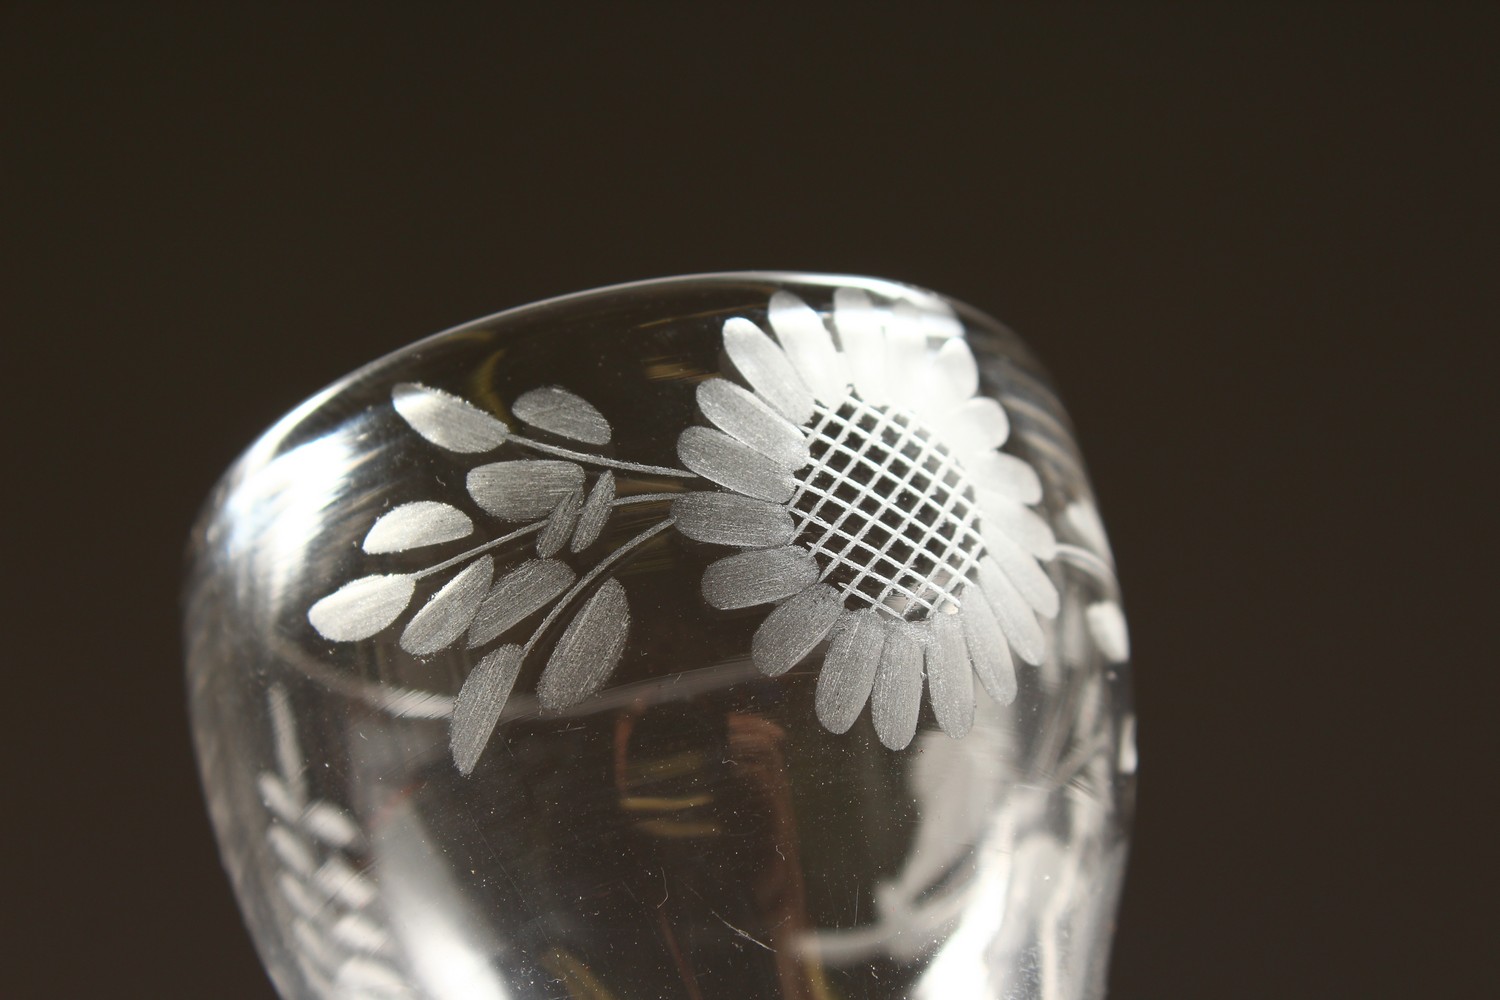 A GEORGIAN WINE GLASS, the bowl engraved with sunflowers, with white air twist stem. 5.5ins high. - Image 7 of 11